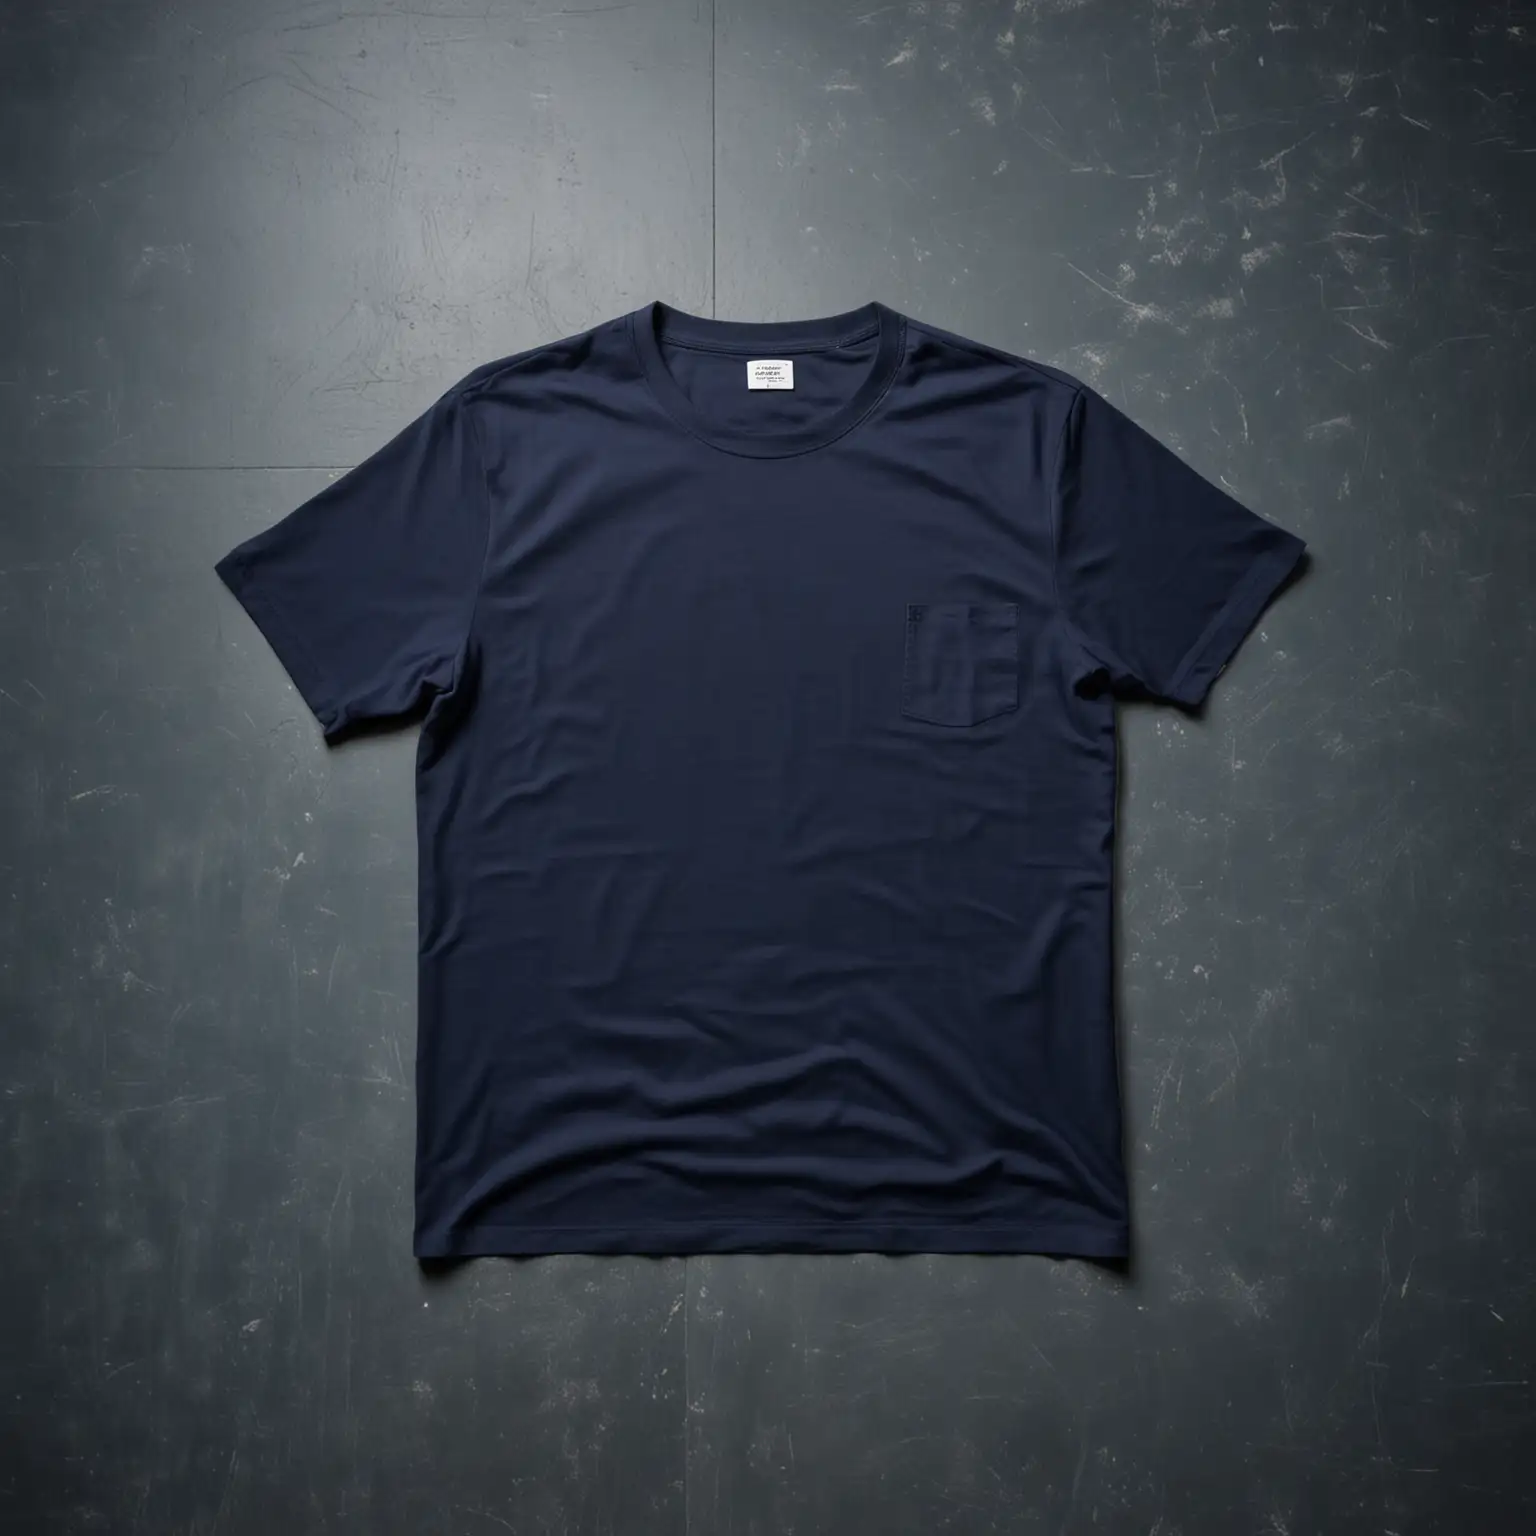 ironed simmetrical proportional blue navy tshirt no wrinkles, lied on floor seen from above with solid contrasting background floor